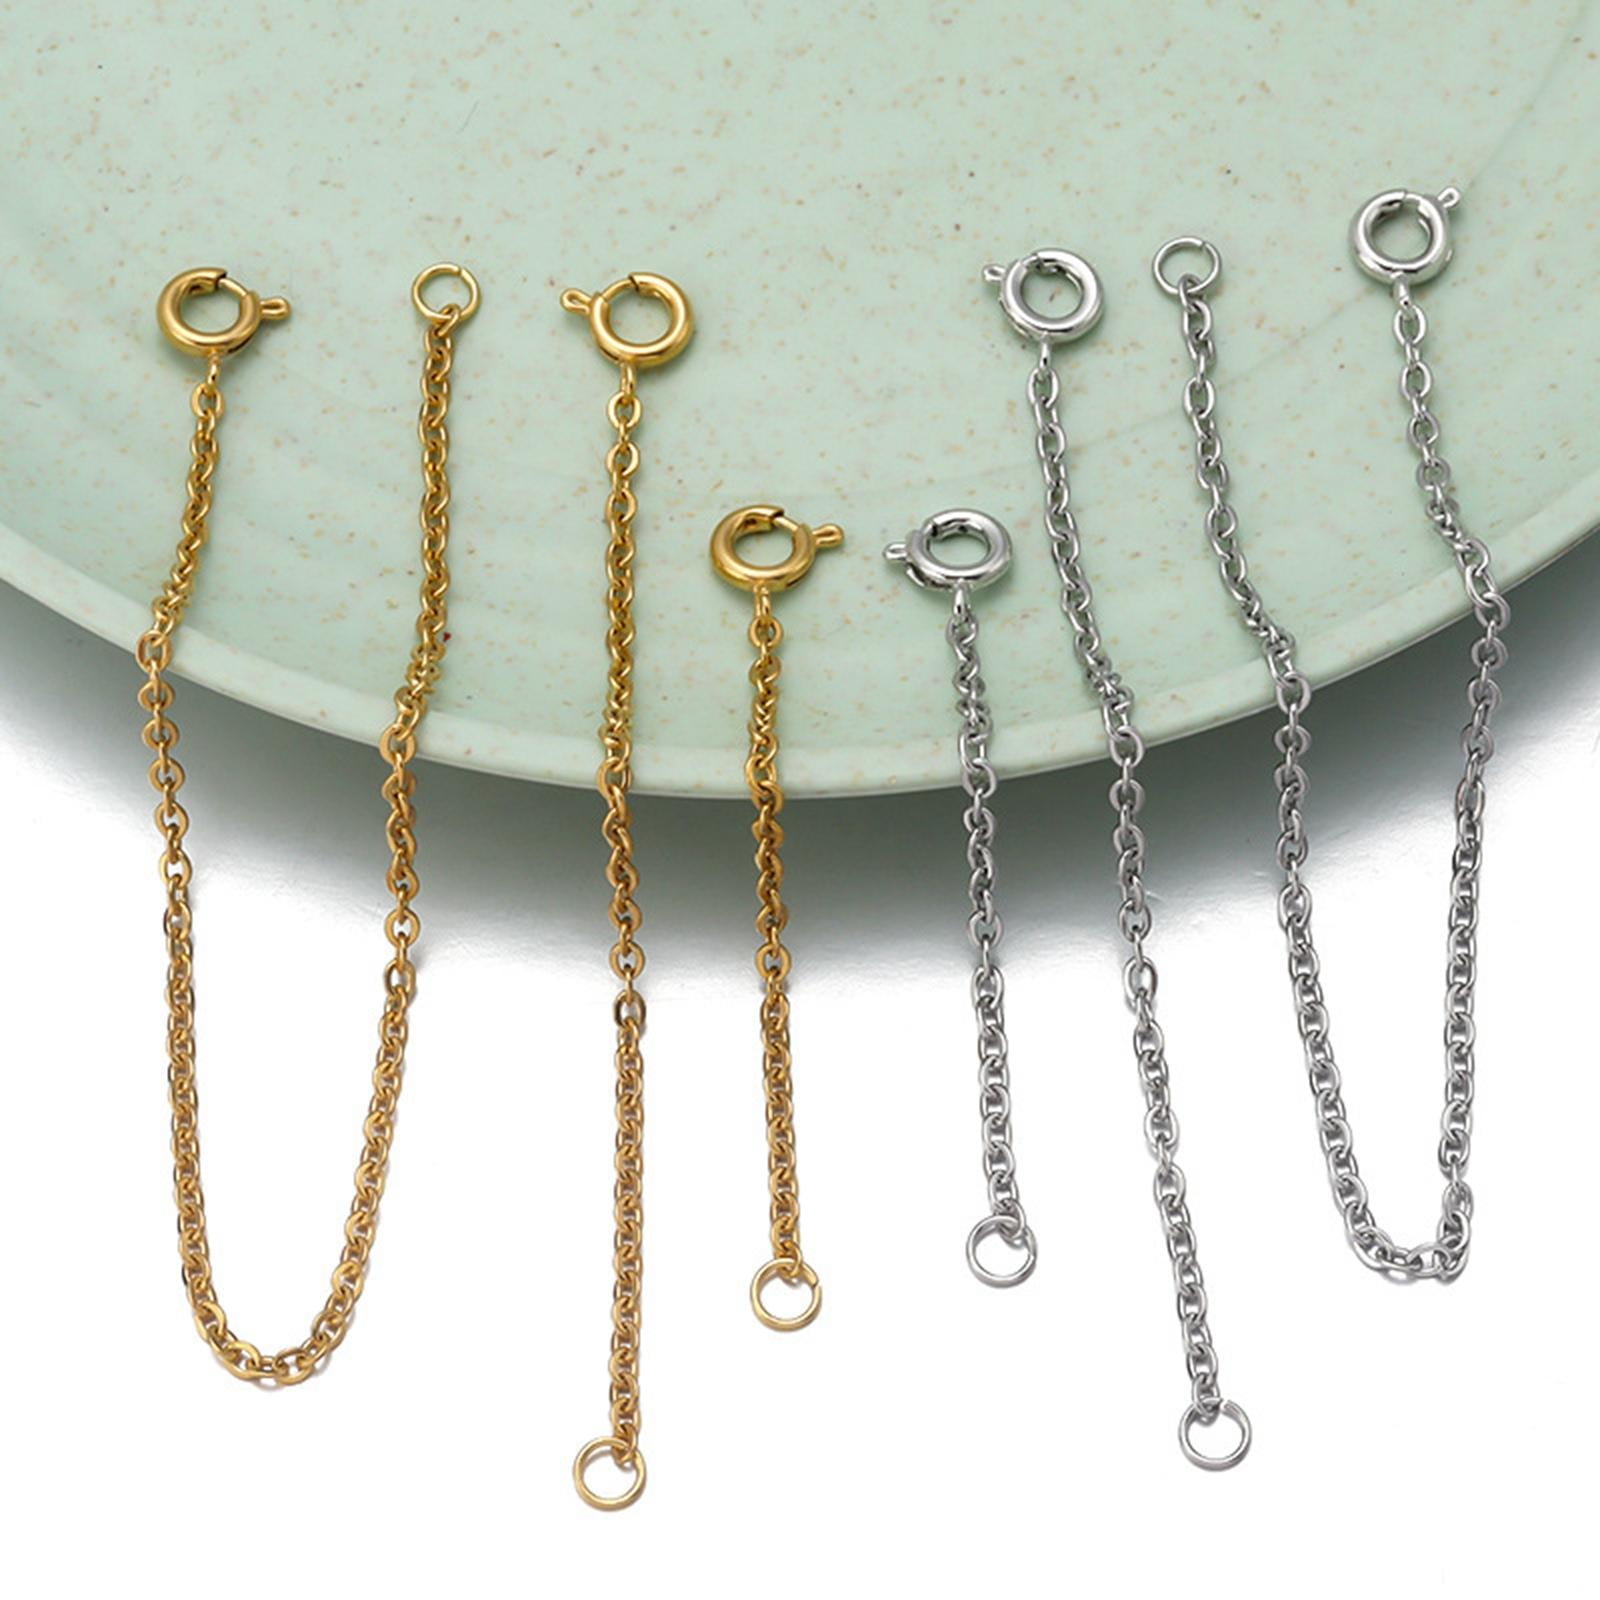 Gold Necklace Extenders Delicate 2,3,4Inches Necklace Extension Chain  Set for Layering Necklaces, Chain Extender with Durable Spring Ring Clasp